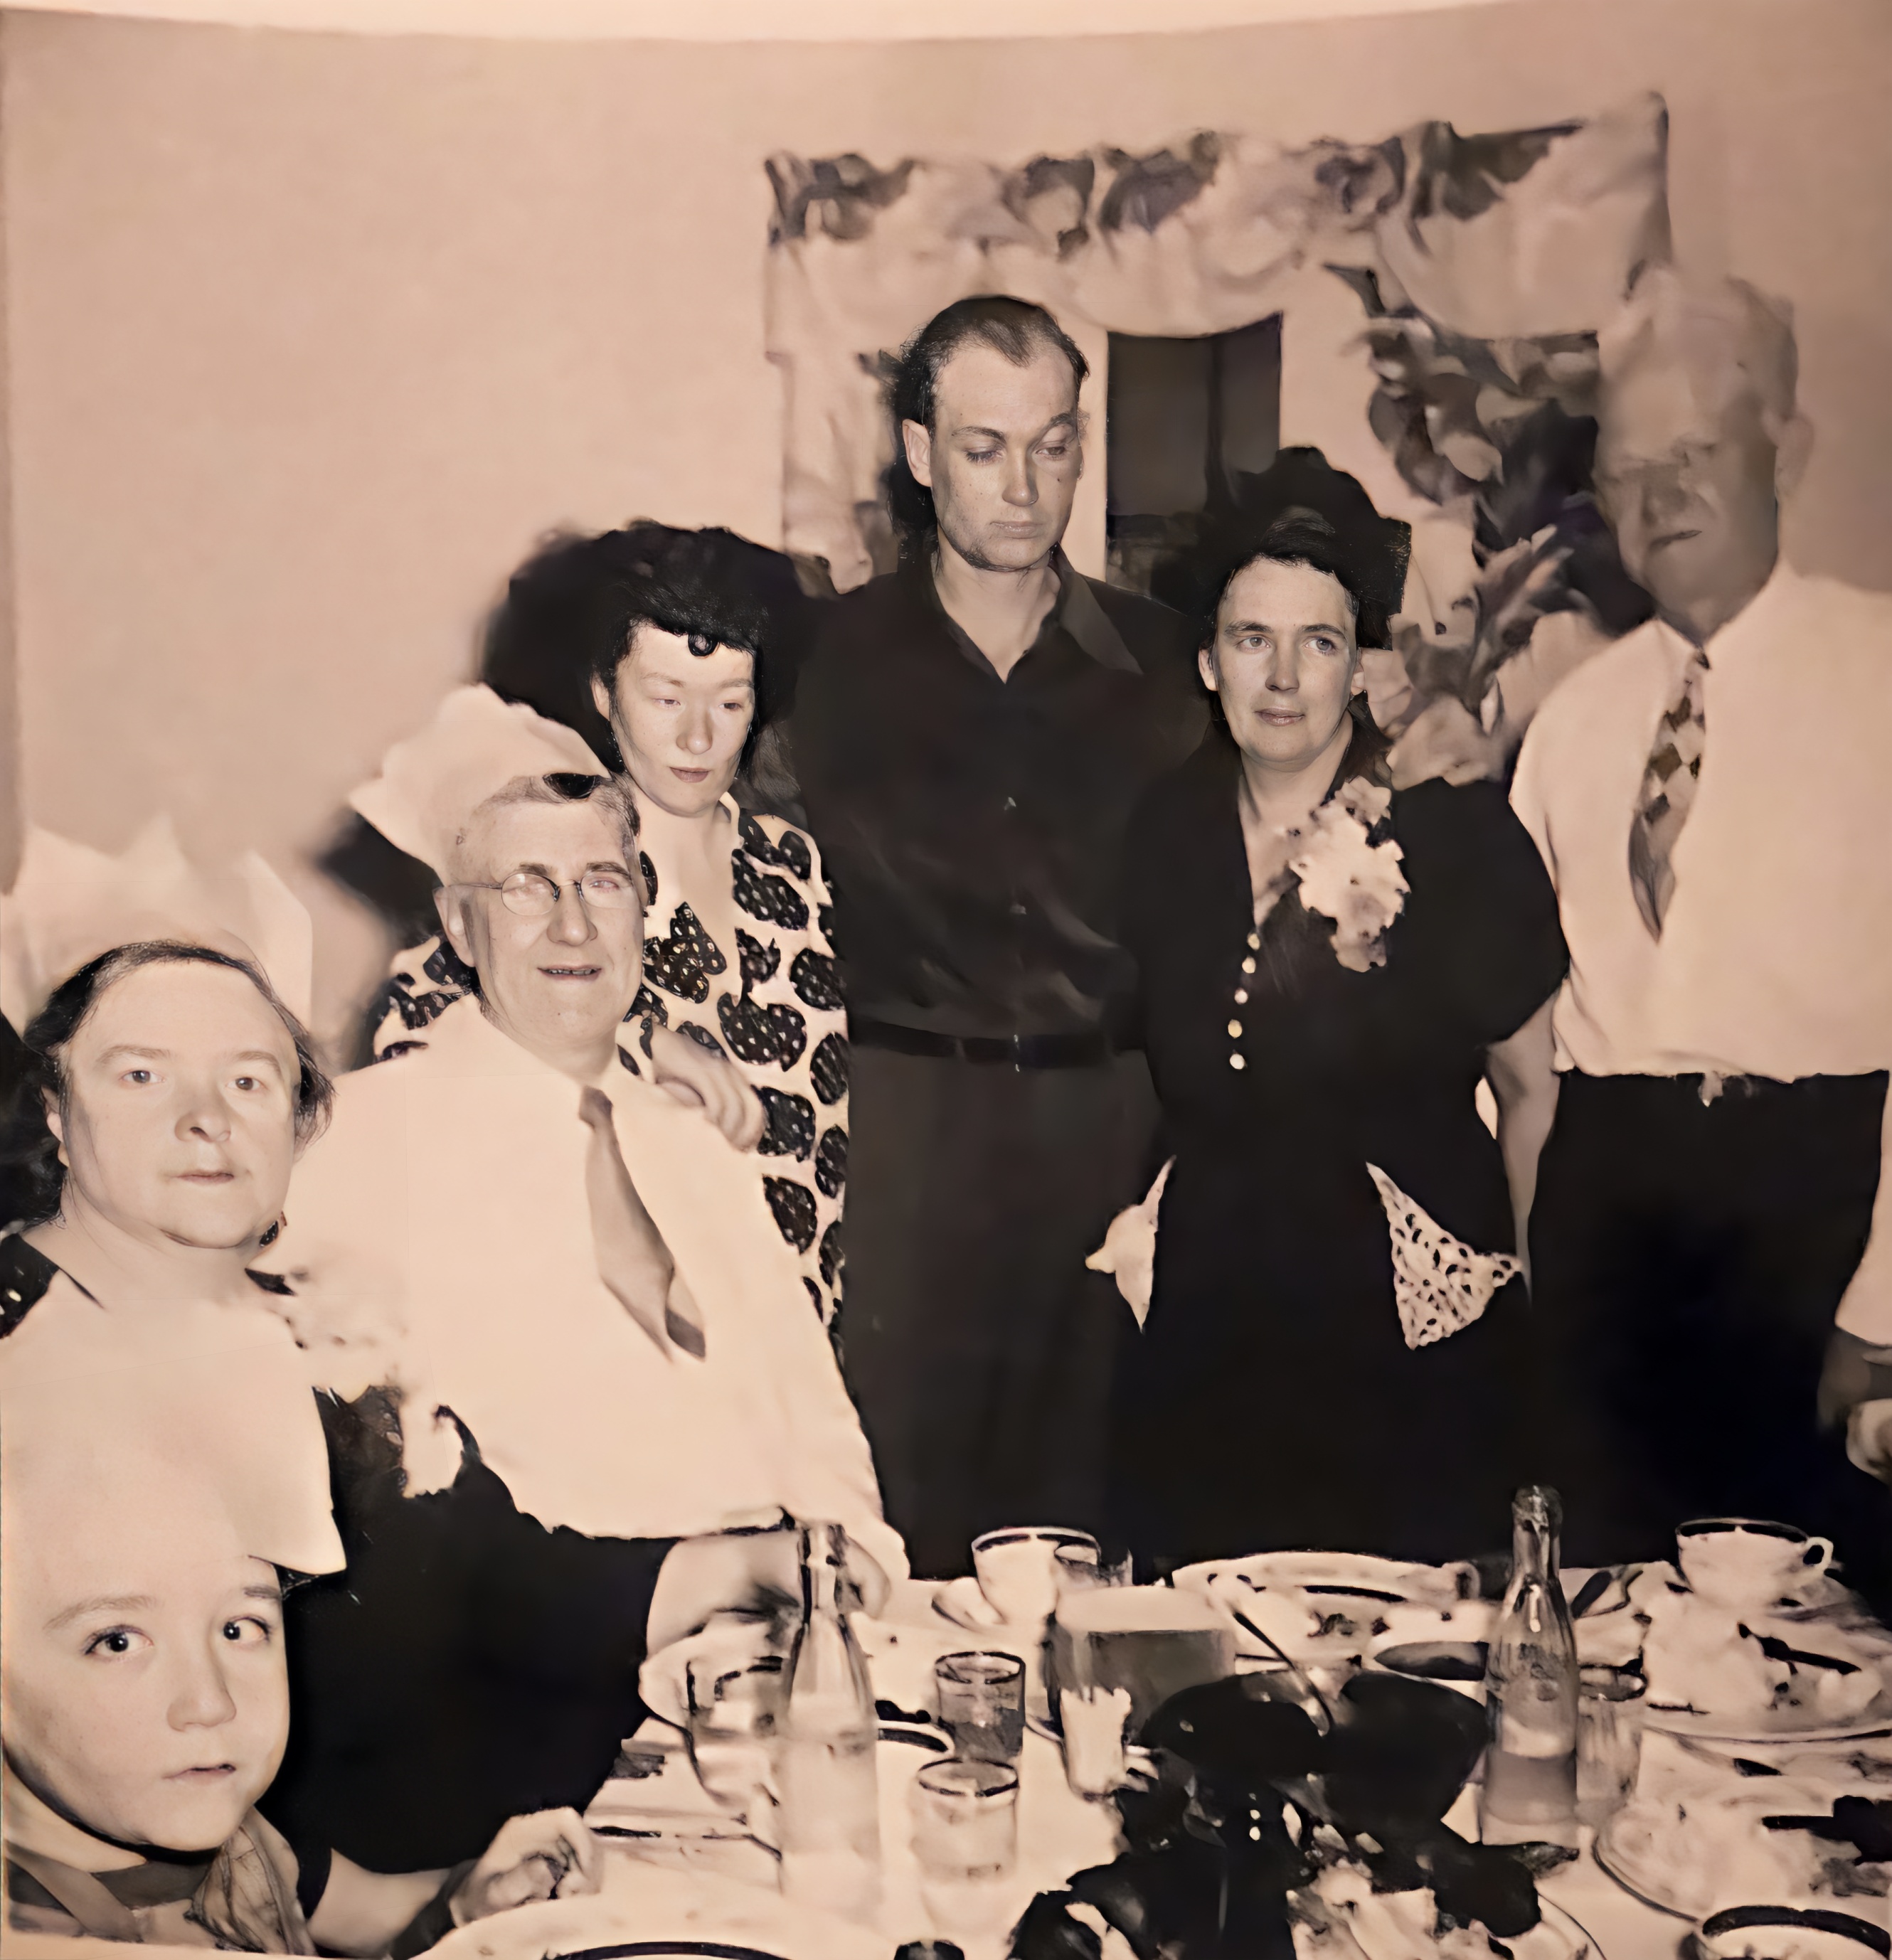 Christmas 1952. Celebrating Nana and Grandpa Frank and Mum and Dad McIntyre‘s wedding anniversaries. Mom Snider was expecting with Karen and She went into labour after the guests left.
Karen was born in December 24, 1952